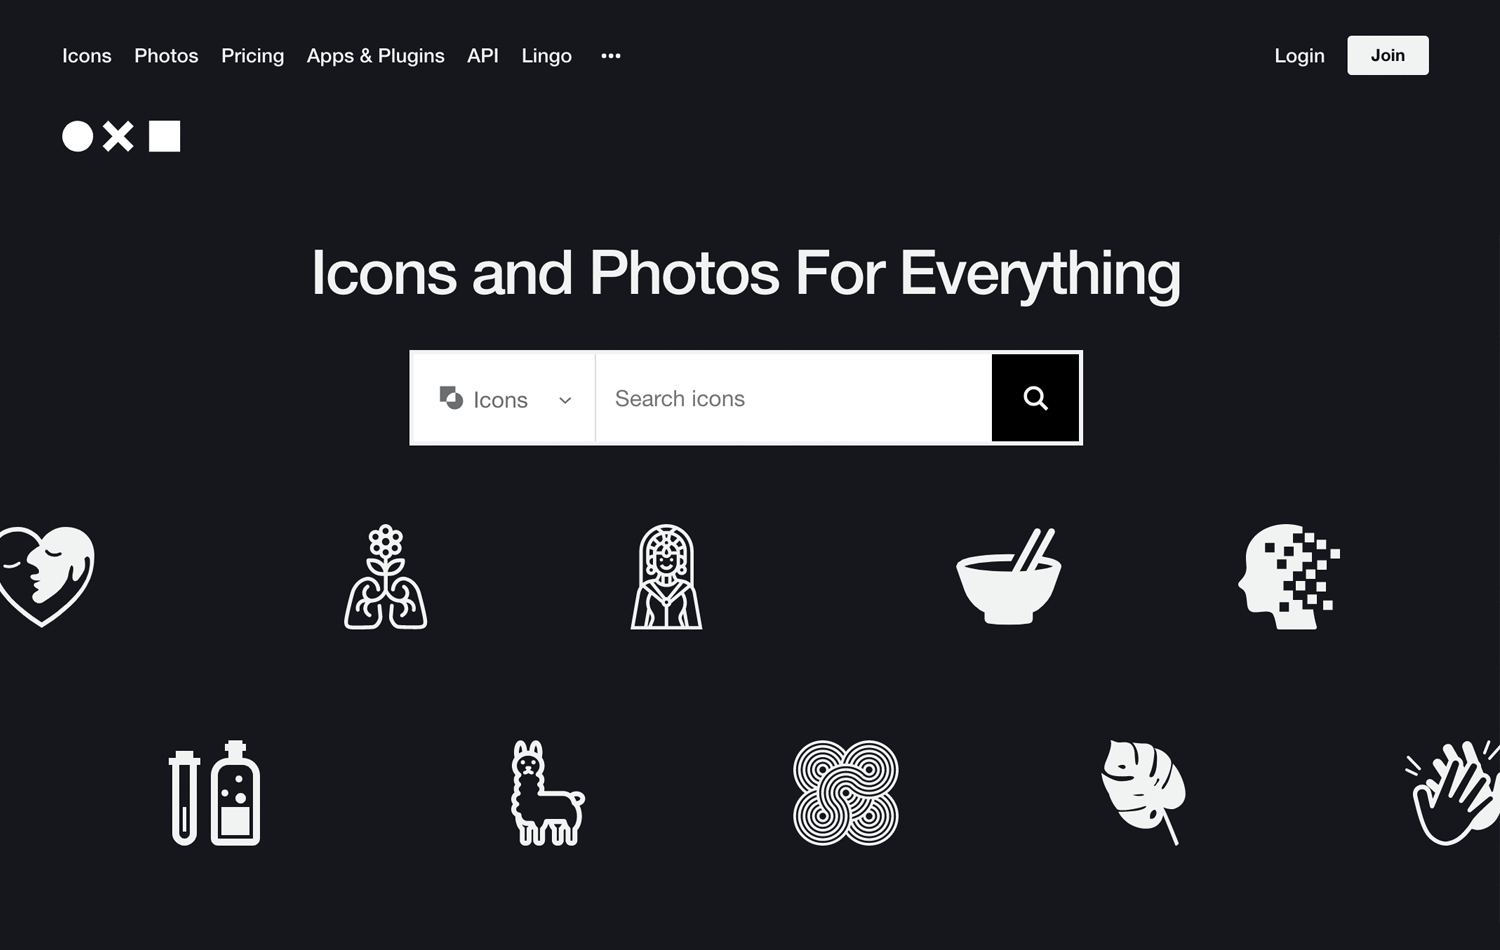 Free vector images - The Noun Project homepage